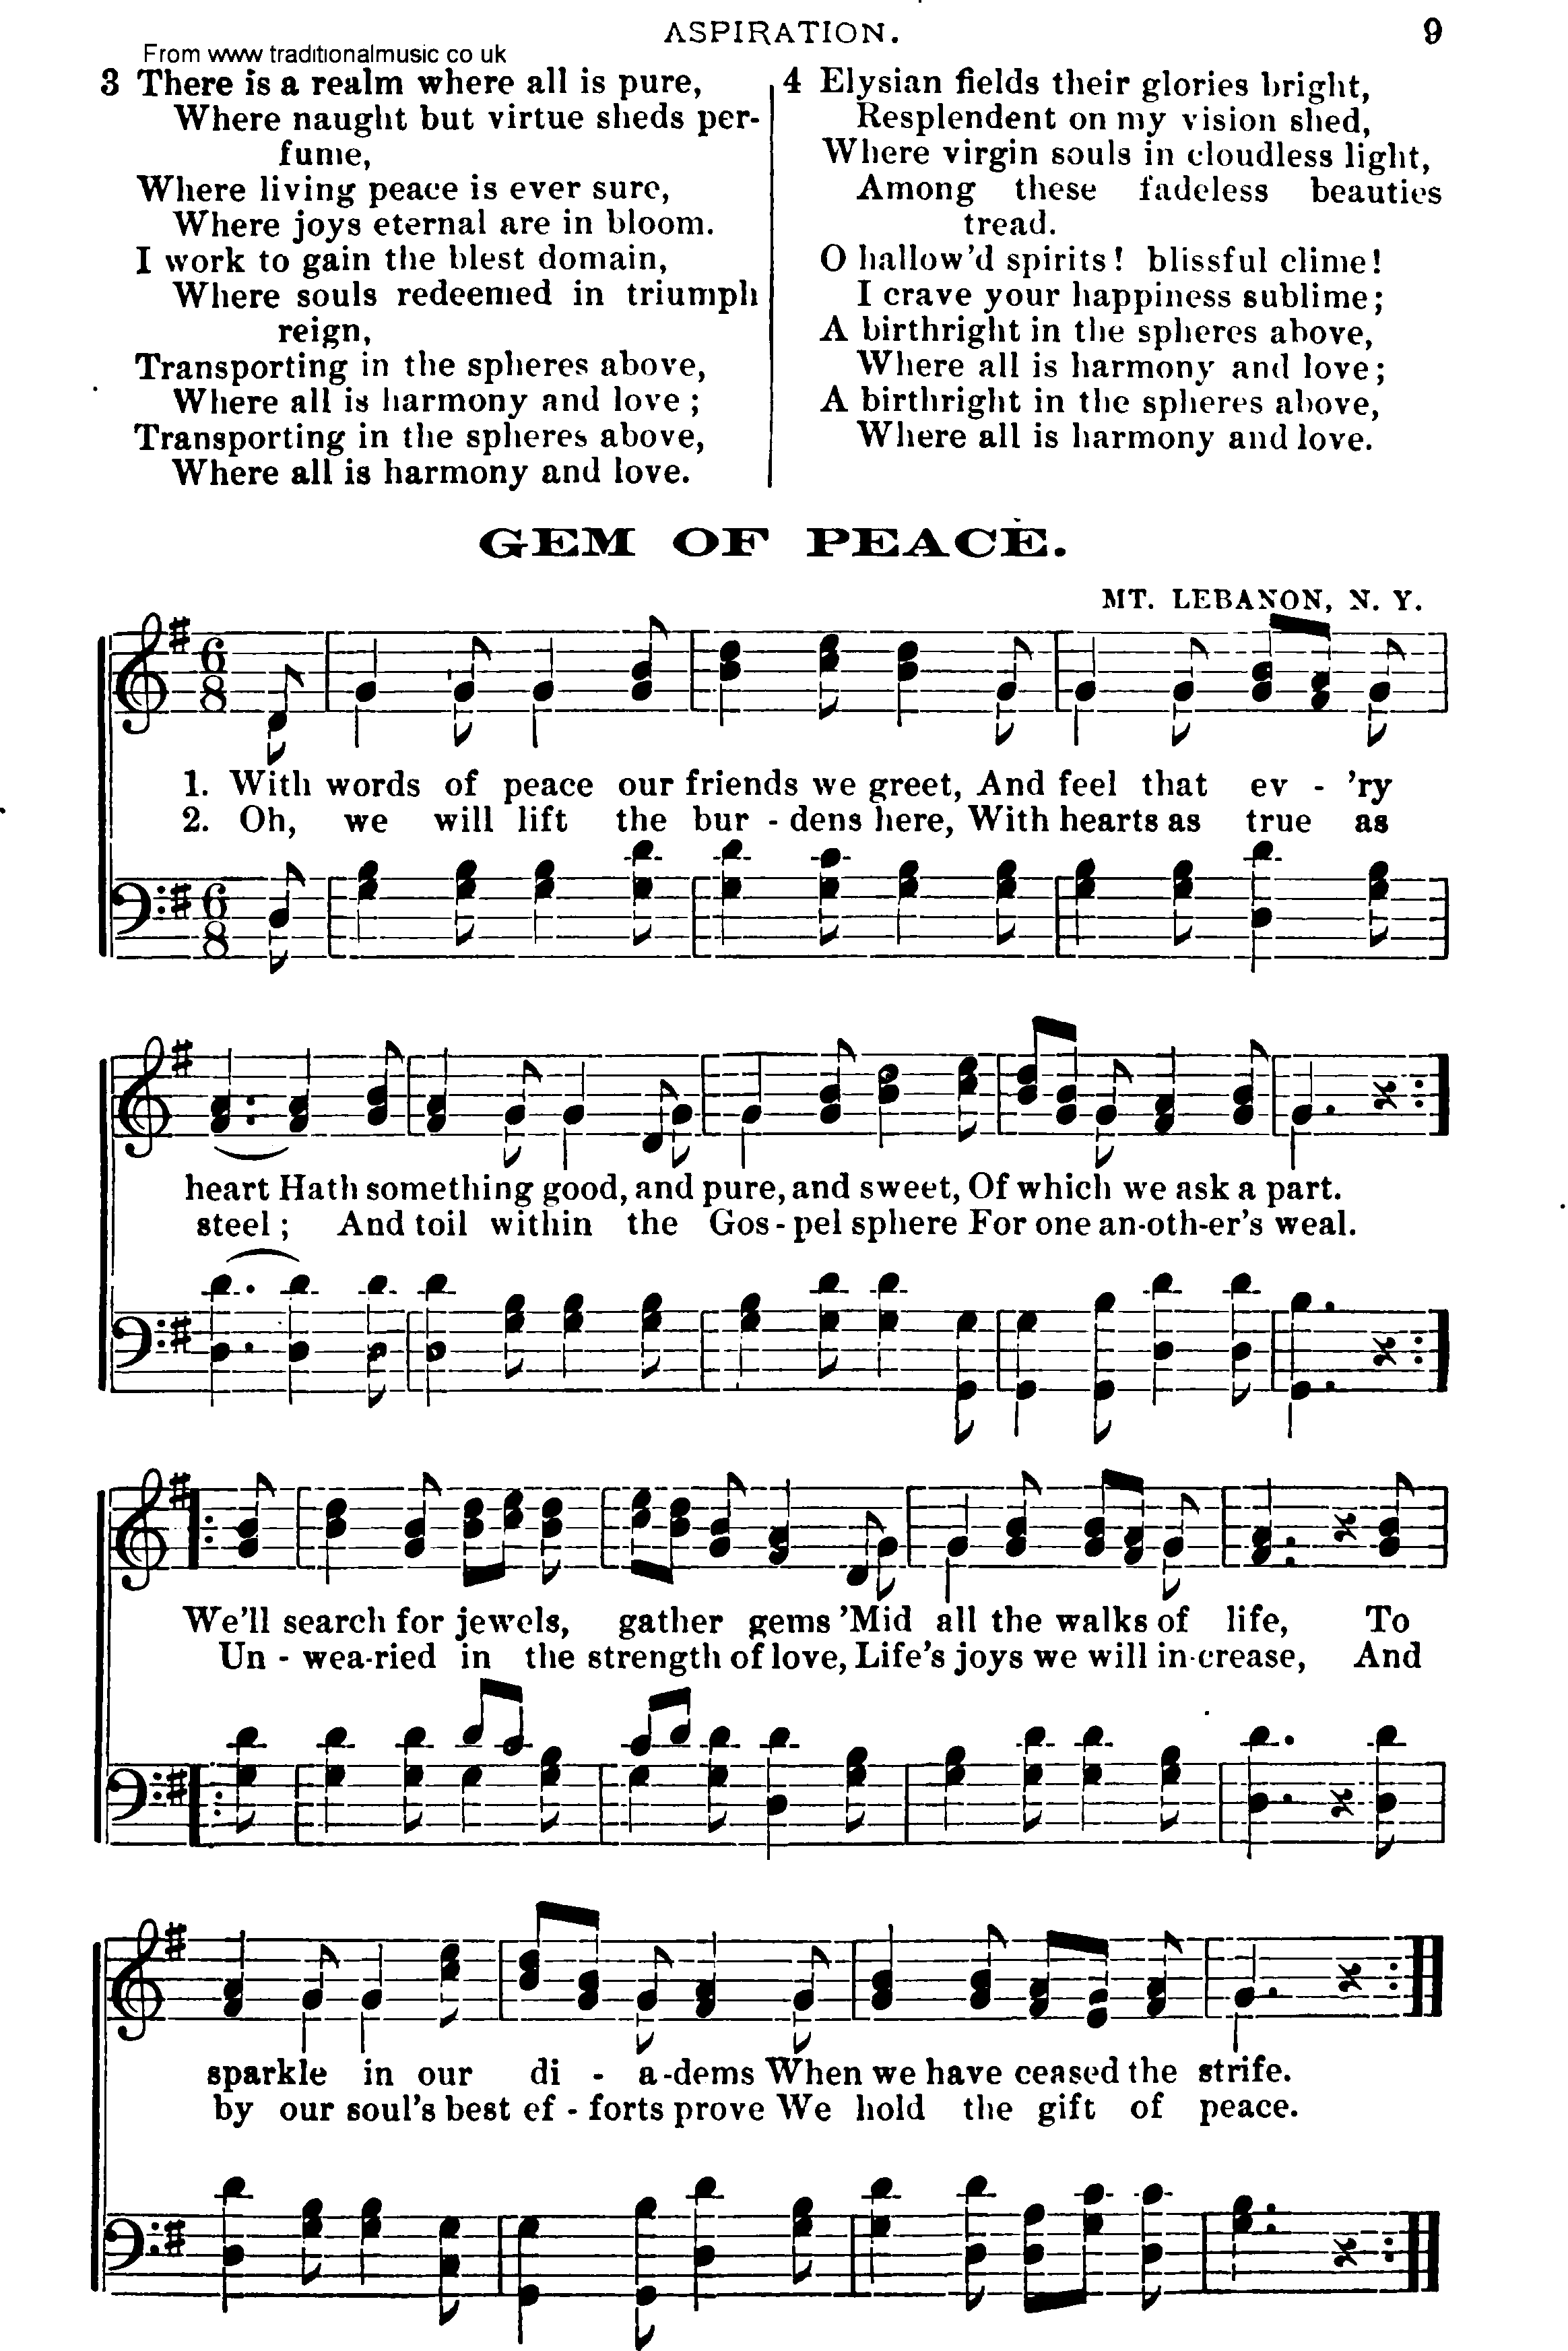 Shaker Music collection, Hymn: Gen Of Peace, sheetmusic and PDF